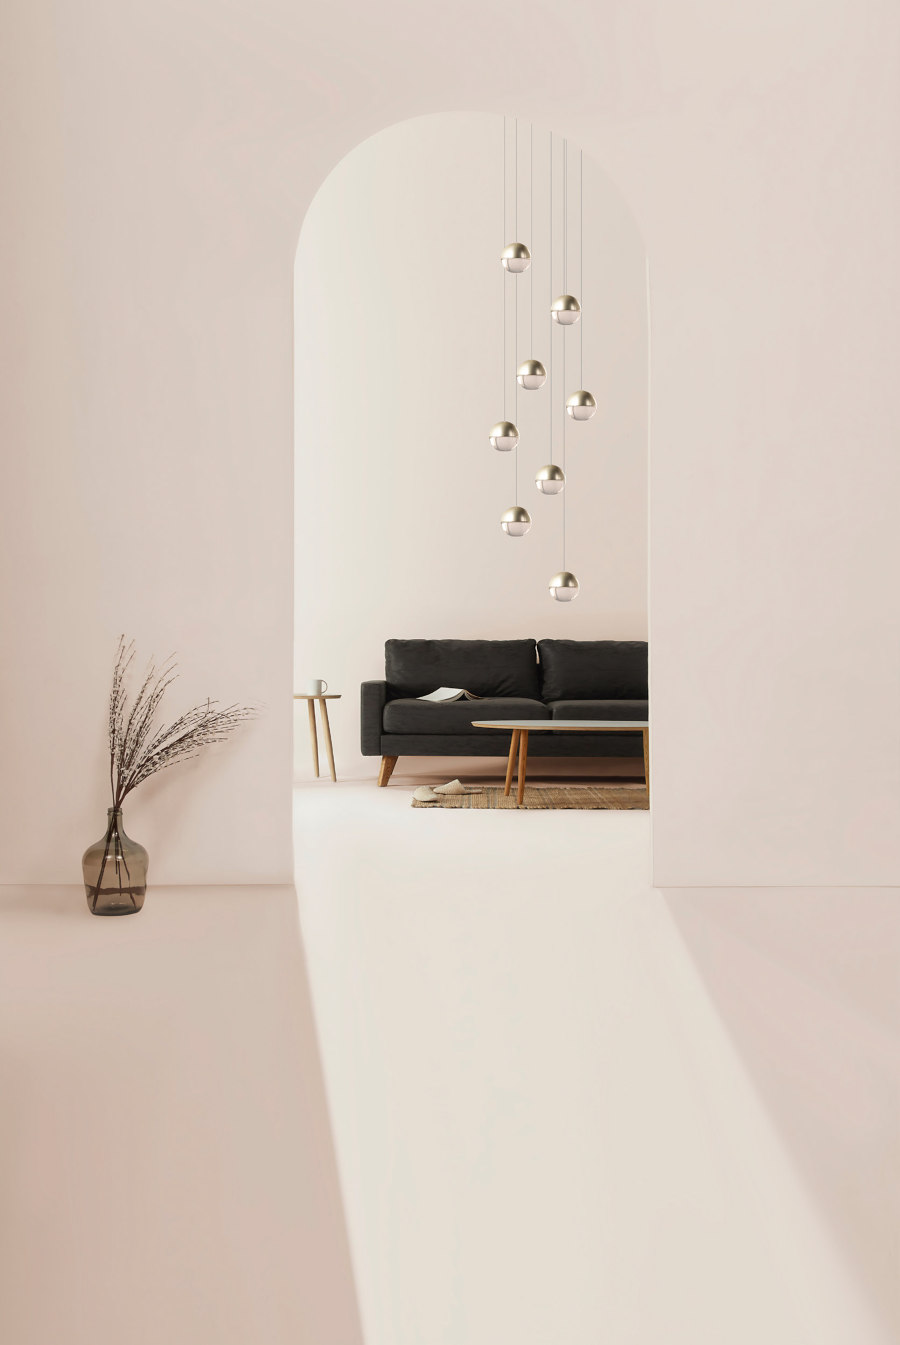 Using light as an architectural tool with Archilume | Nouveautés